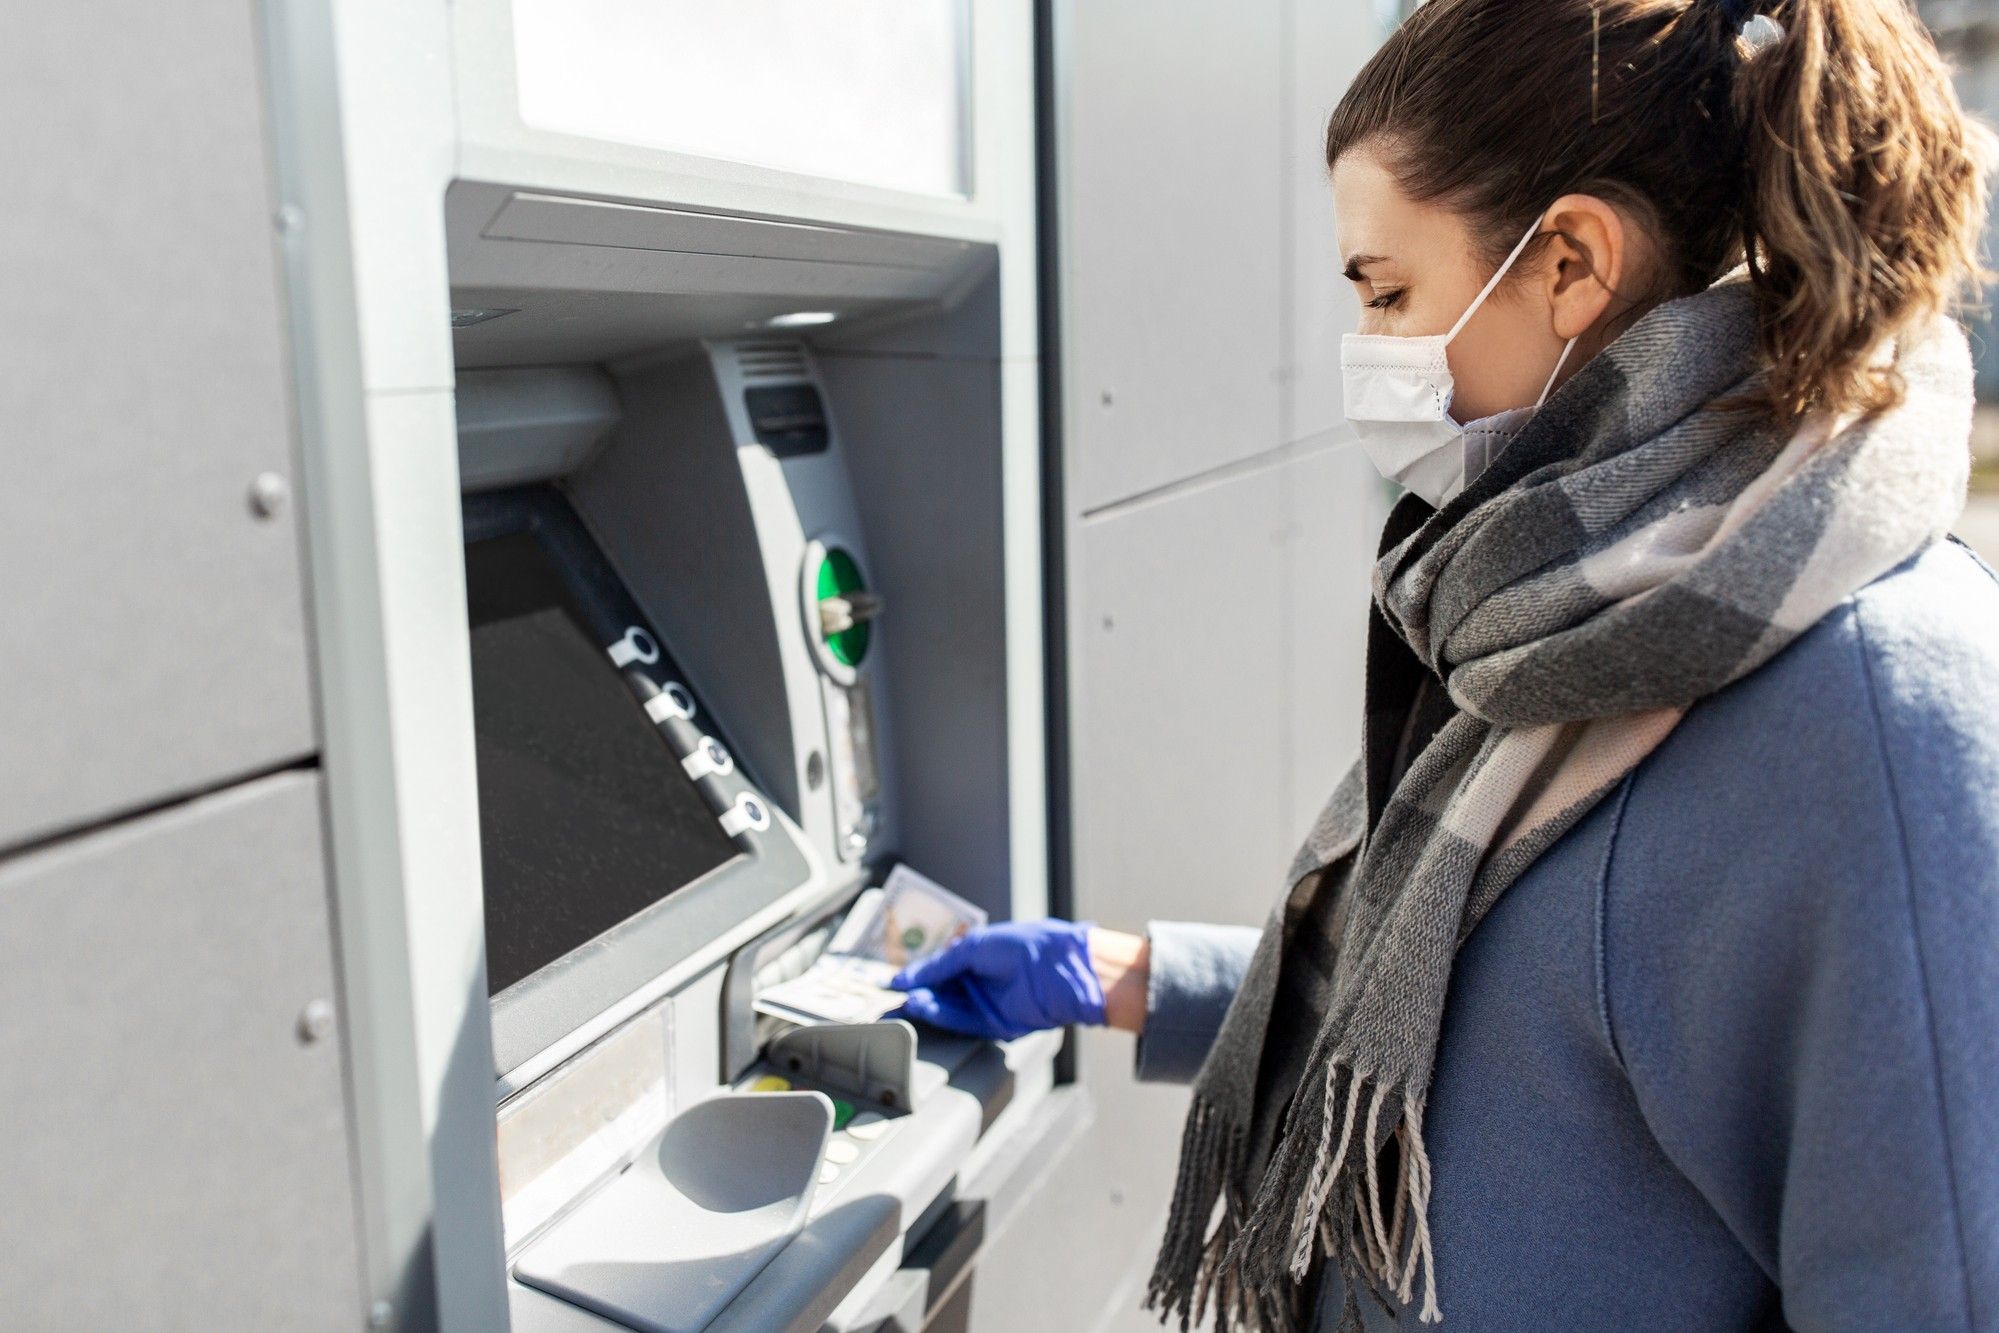 Capital One and two plaintiffs have recently filed a motion for final approval of a $13 million ATM fee class action settlement.